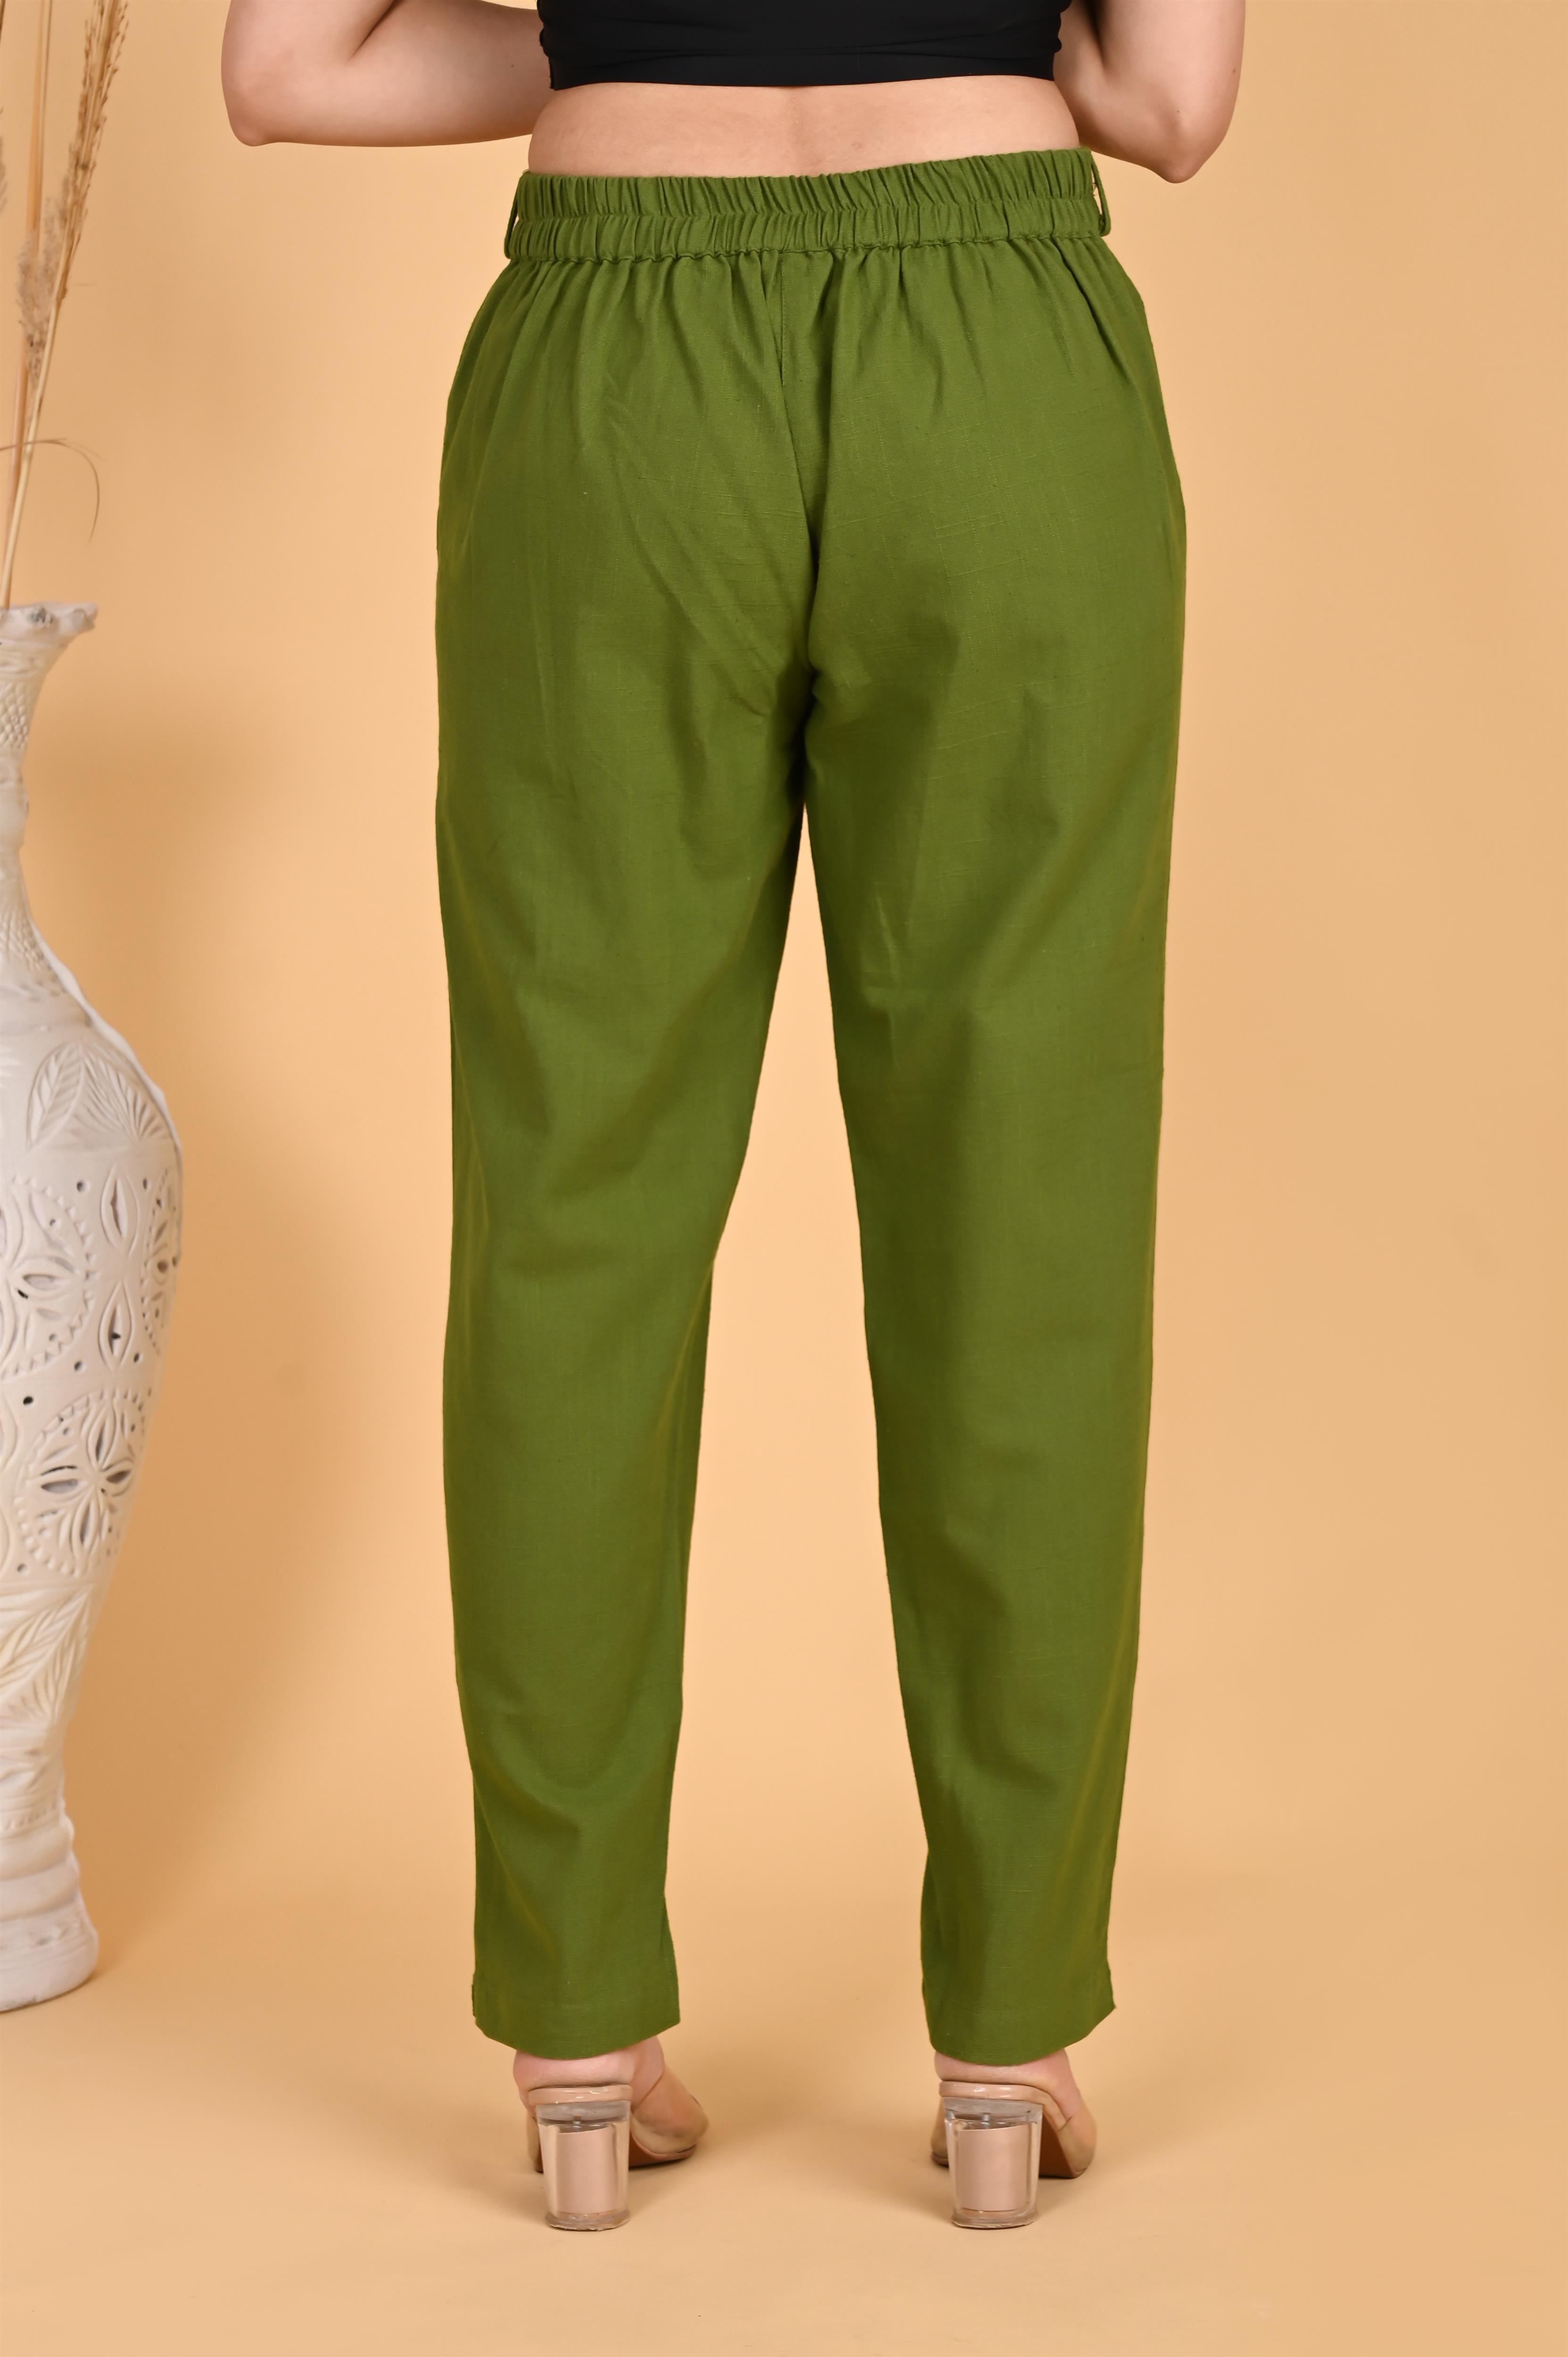 OLIVE GREEN CLASSIC COTTON PANTS - SKYTICK